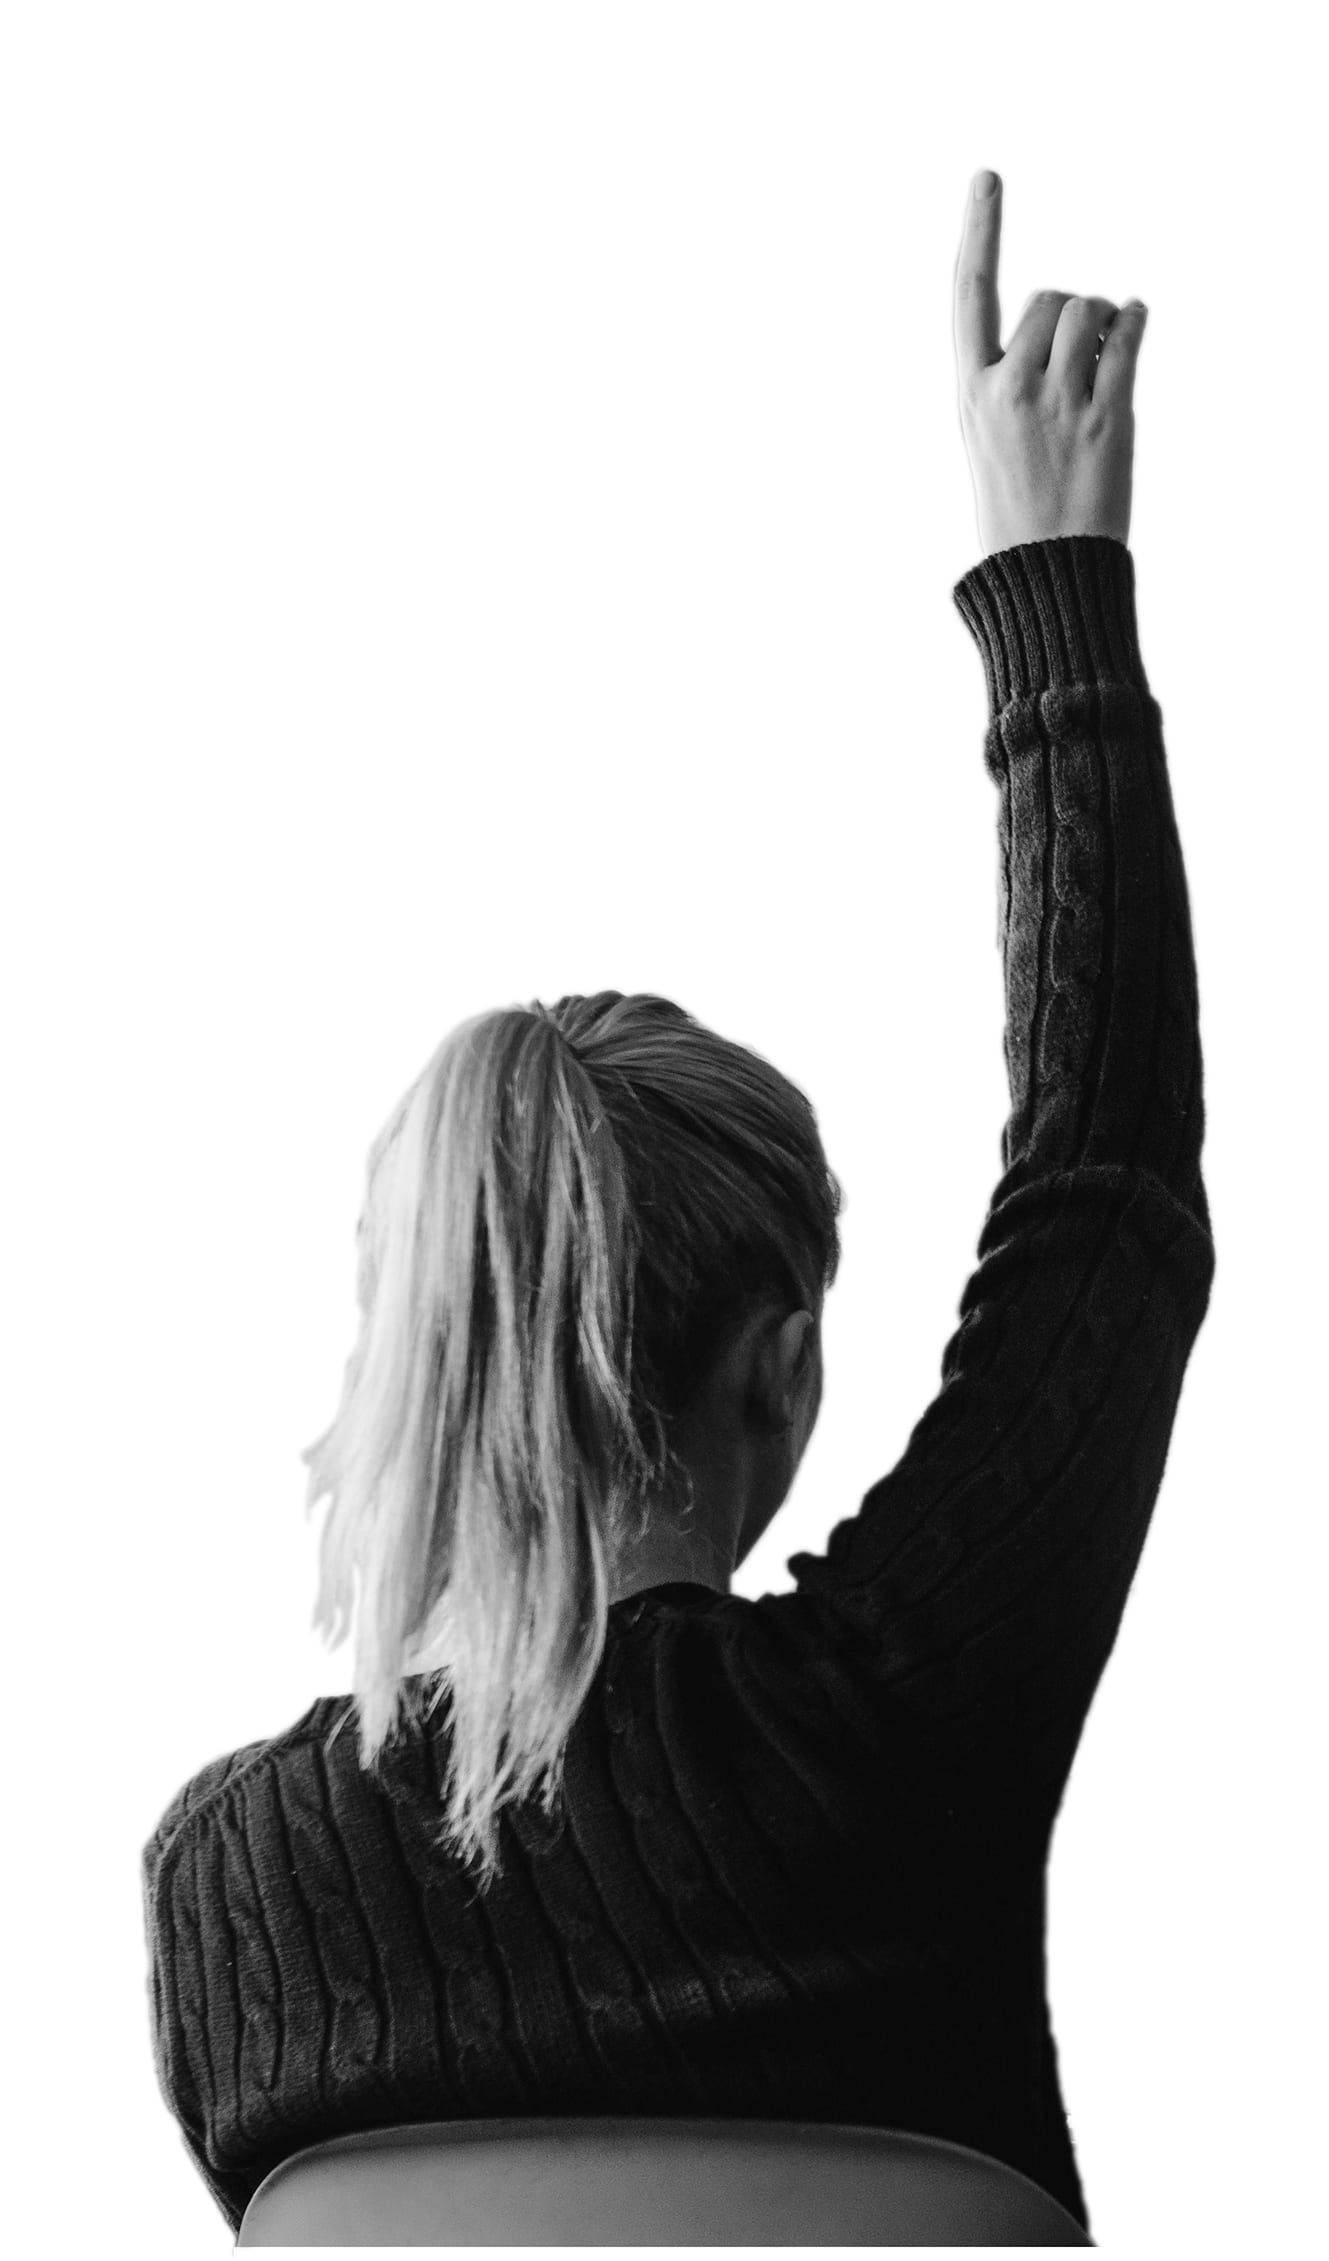 A girl with her hand raised